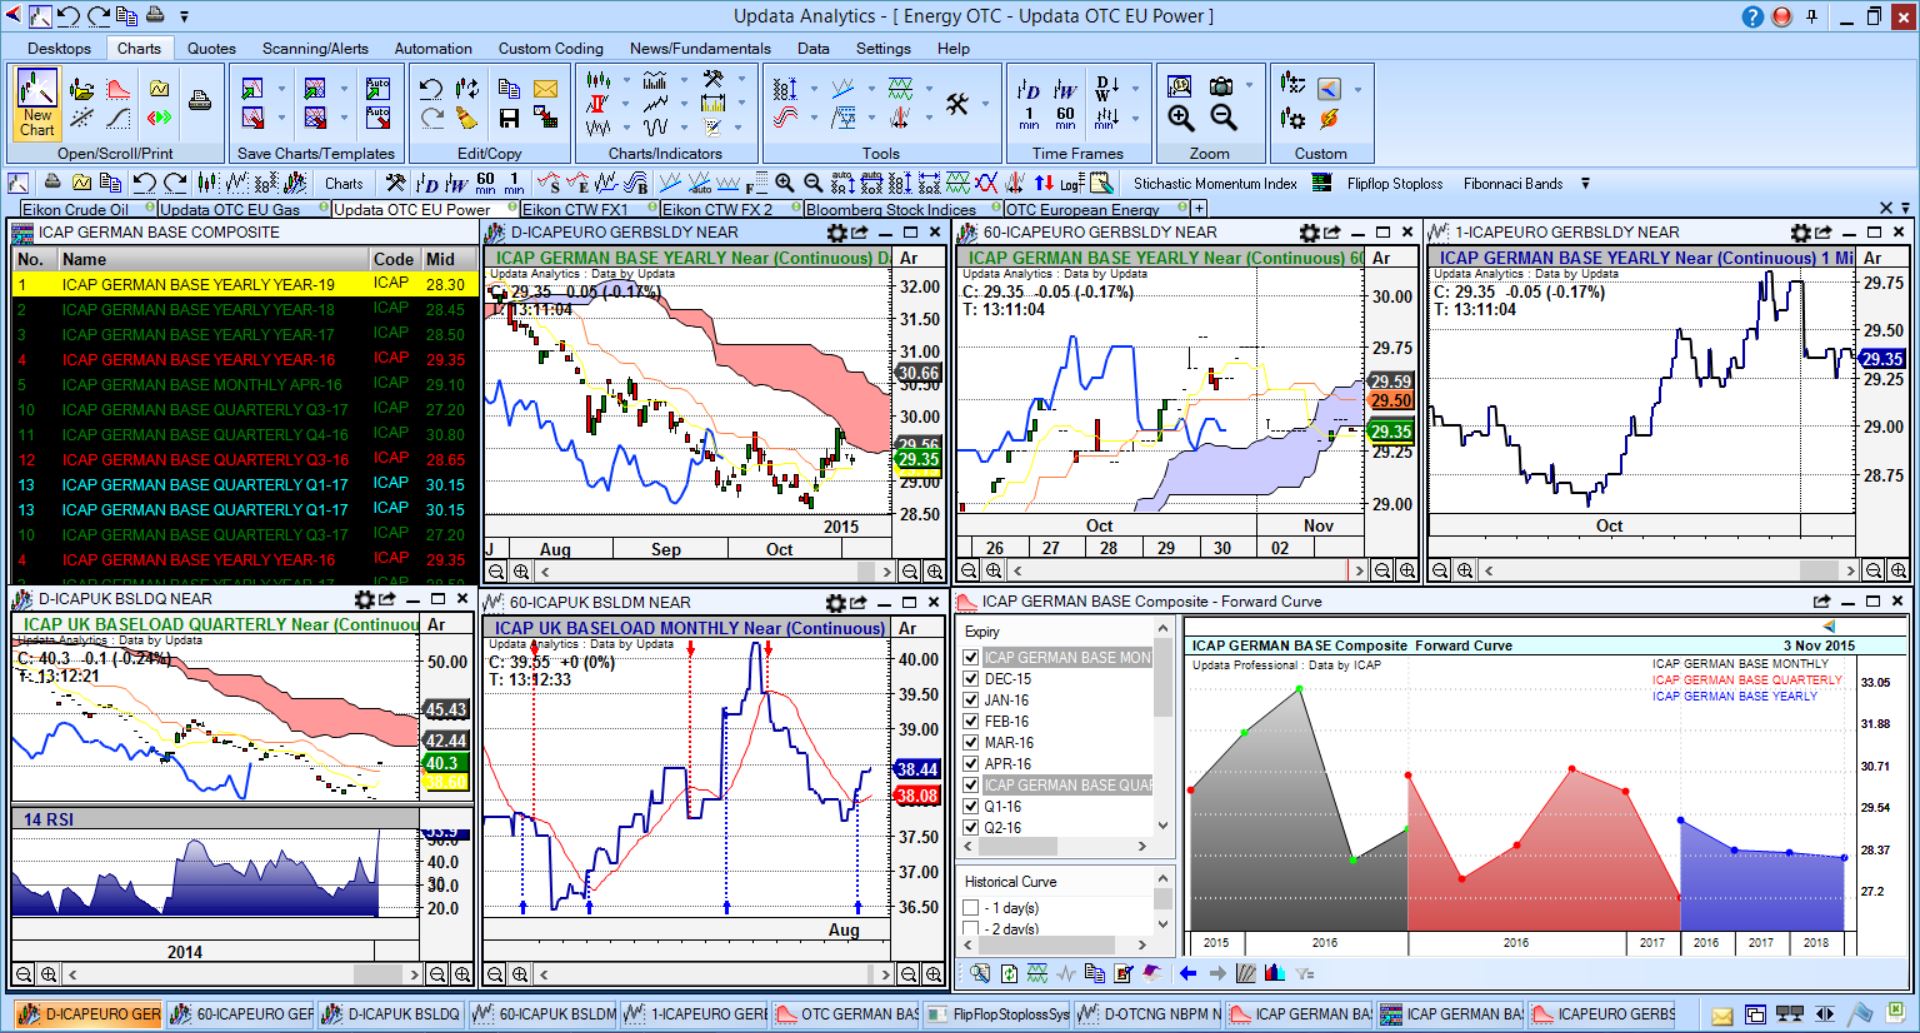 Data visualization and chart analytics tools for real time OTC energy data from ICAP